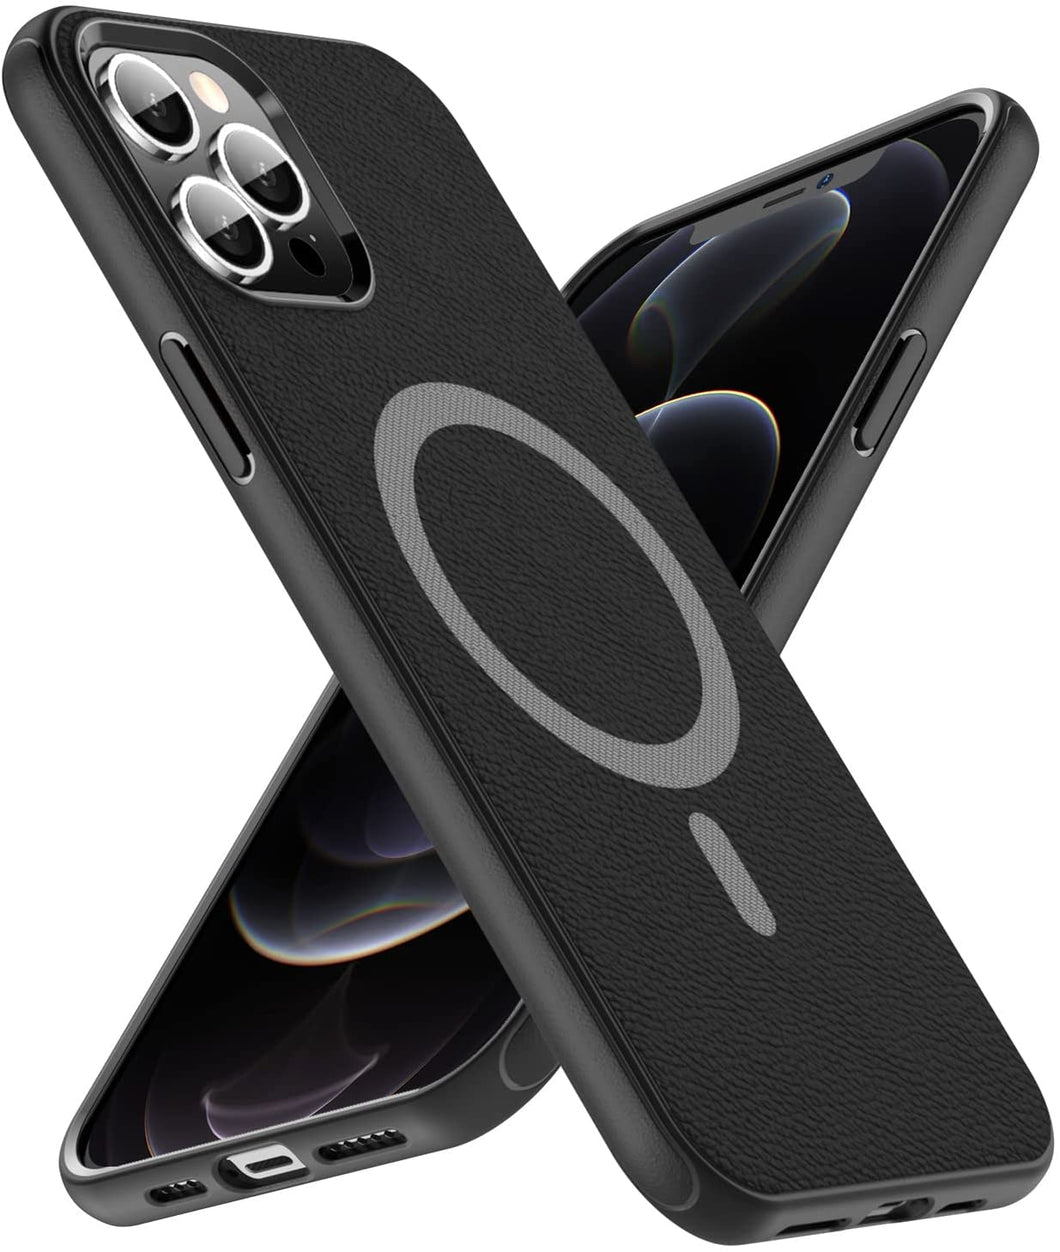 xiwxi iPhone 12 Pro Max Case, [Ultra Magnetic]-Black